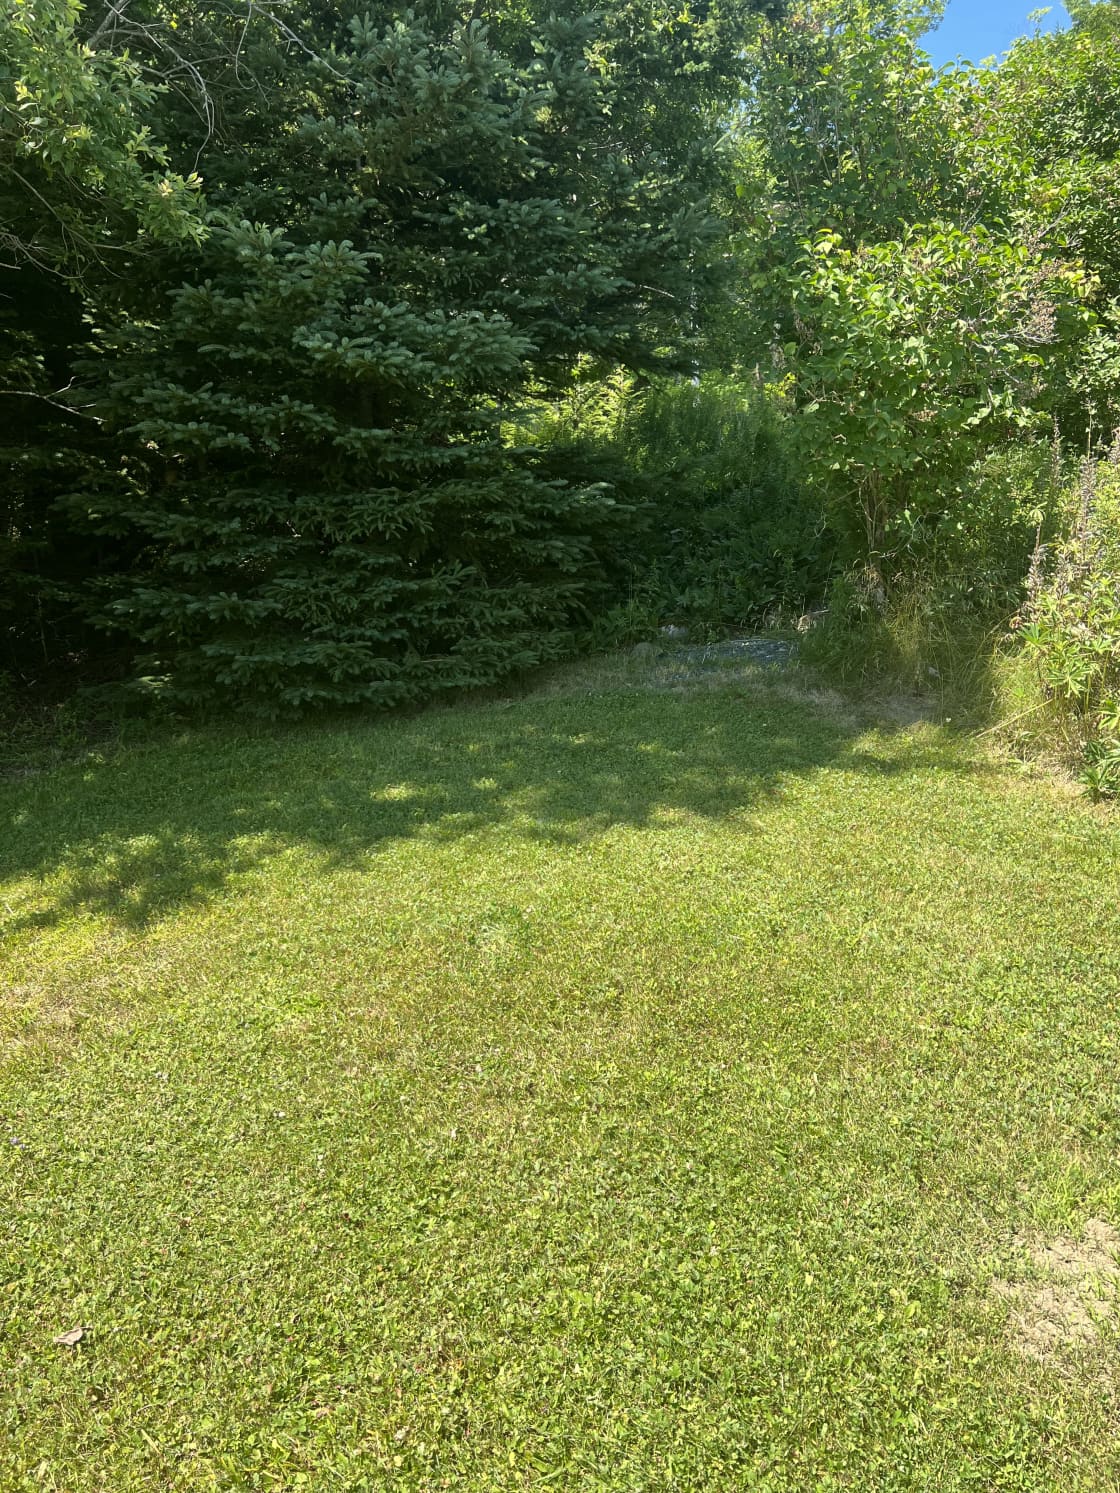 Site 2 - This property slopes downward slightly, but there is ample space for a tent, SUV, van or camper. It gets a lot of sun in the morning and shade in the evening. It is nearby the road but still has some privacy. 
